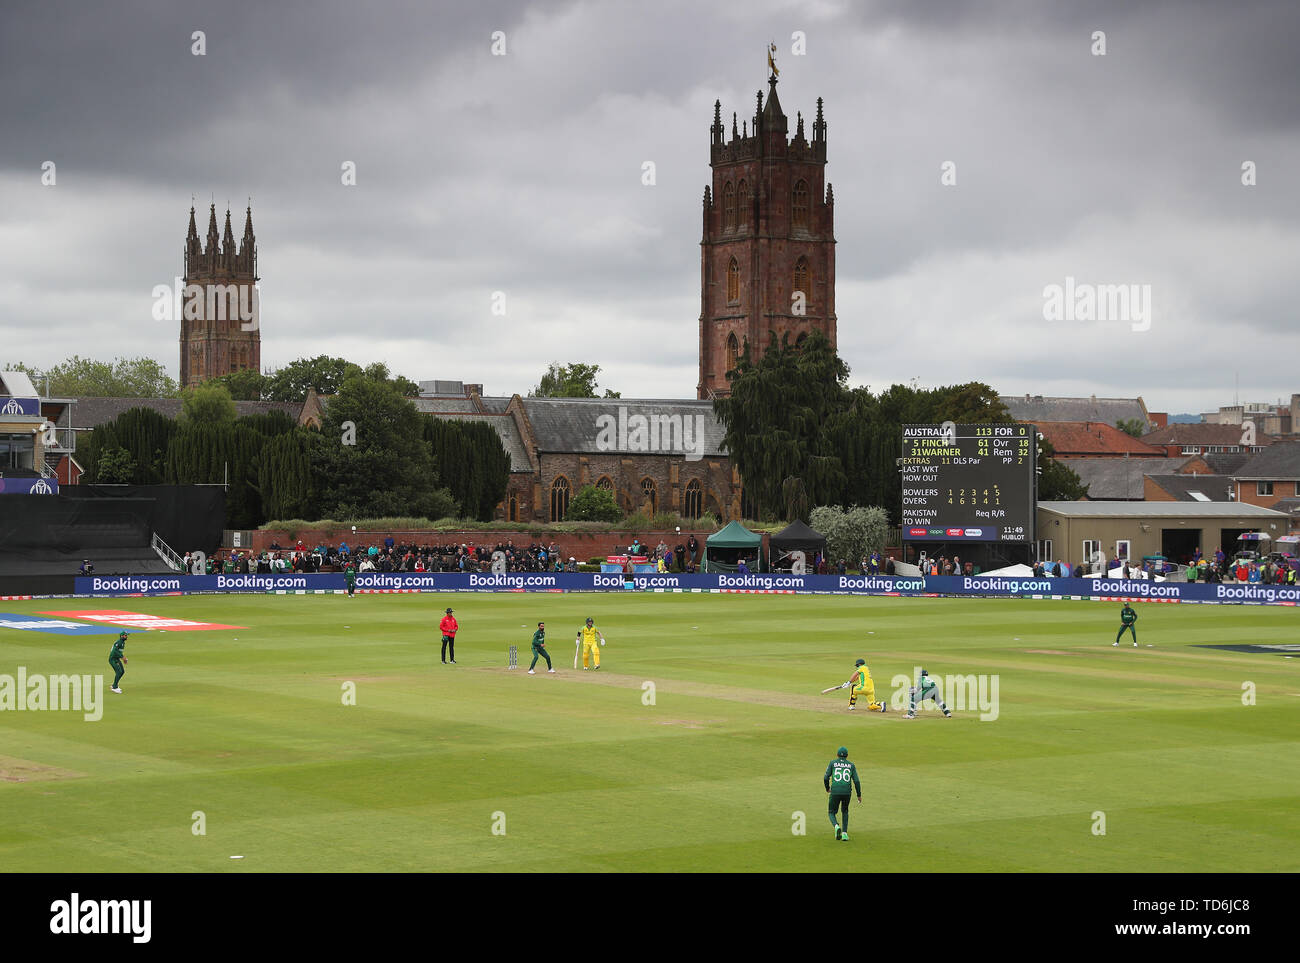 Australia's Aaron Finch batting during the ICC cricket World Cup group stage match at County Ground Taunton. Stock Photo